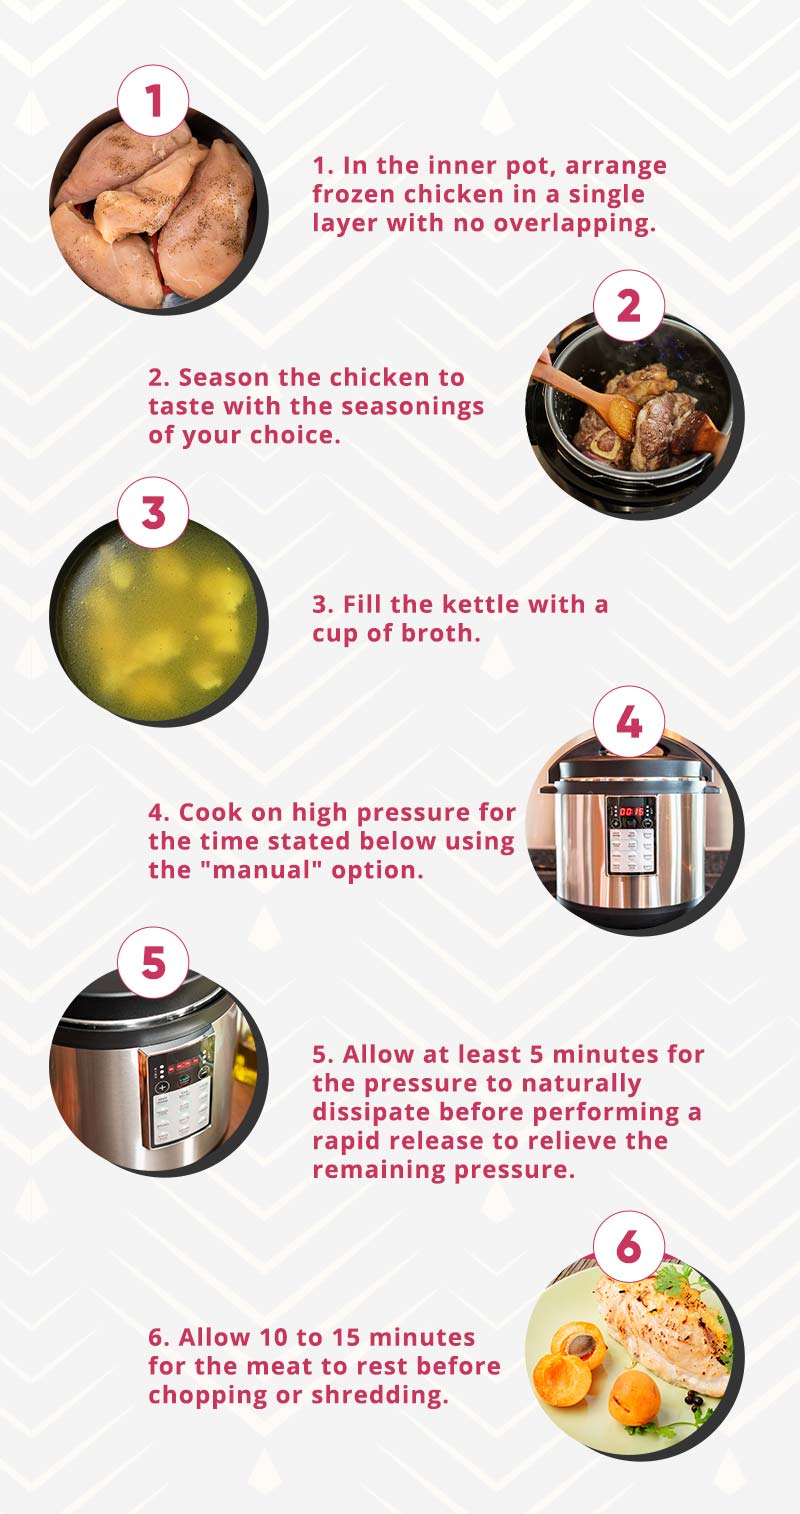 Steps For Cooking Frozen Chicken In The Instant Pot